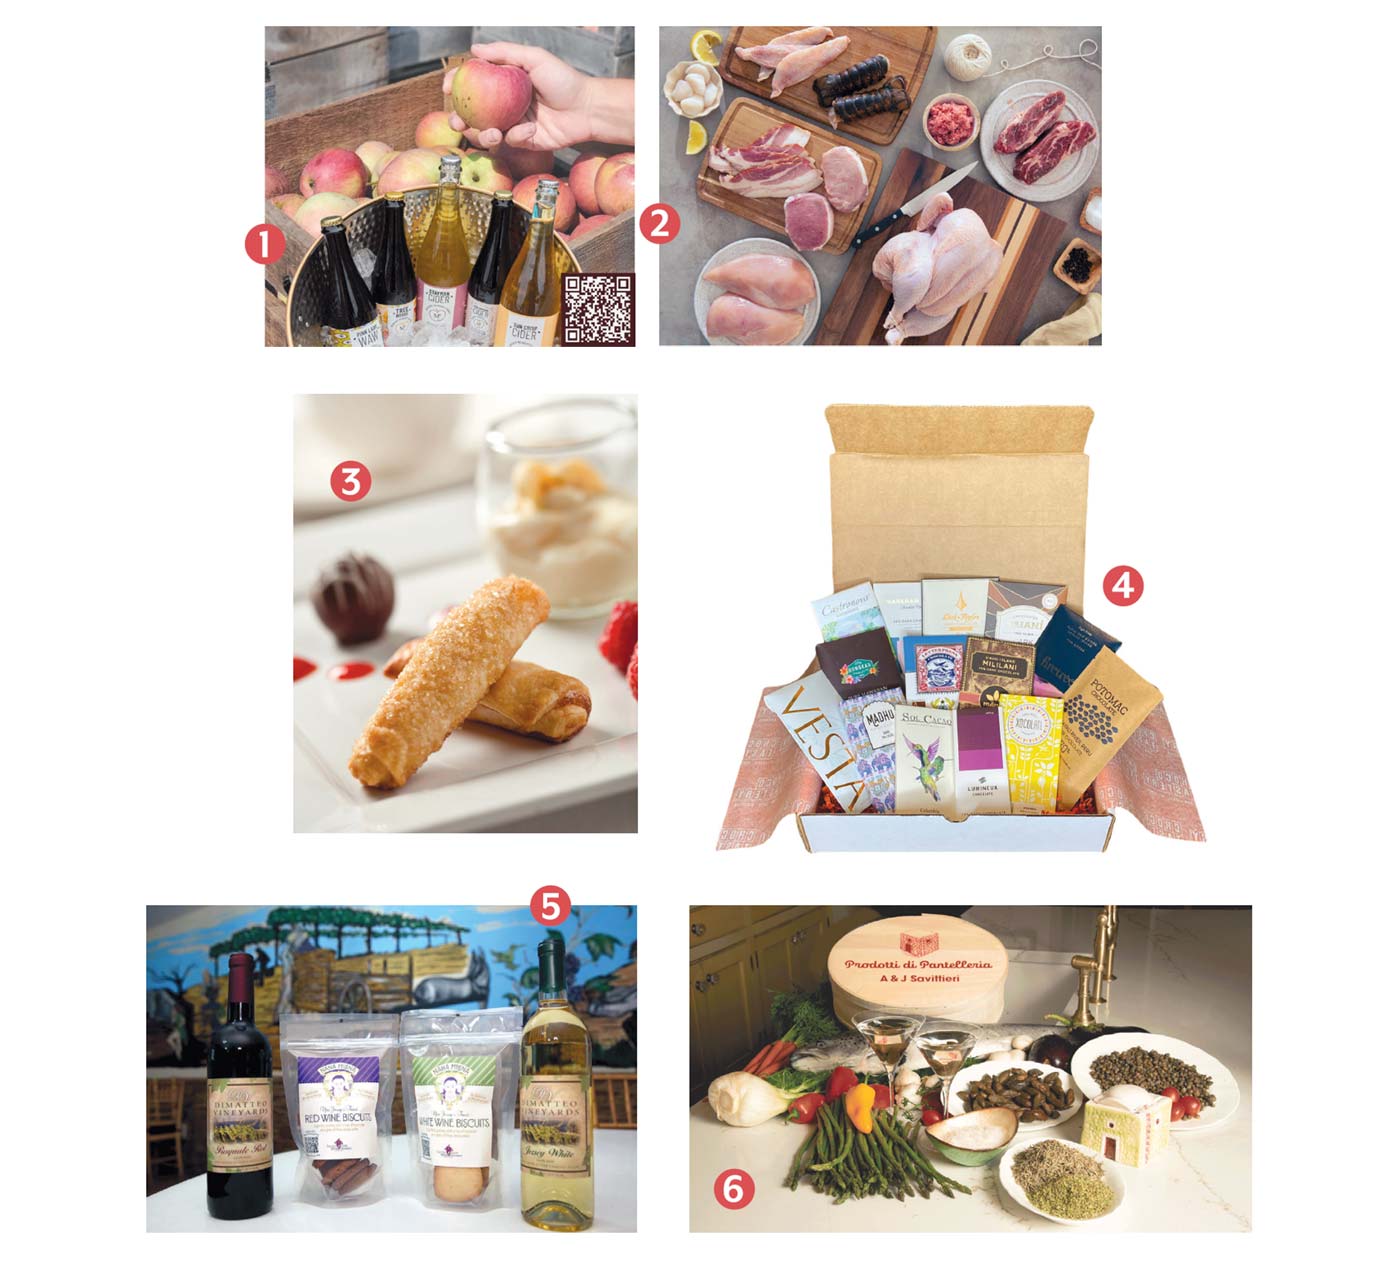 35 Best Holiday Food Gifts 2022 - Holiday and Gourmet Food Gift Ideas